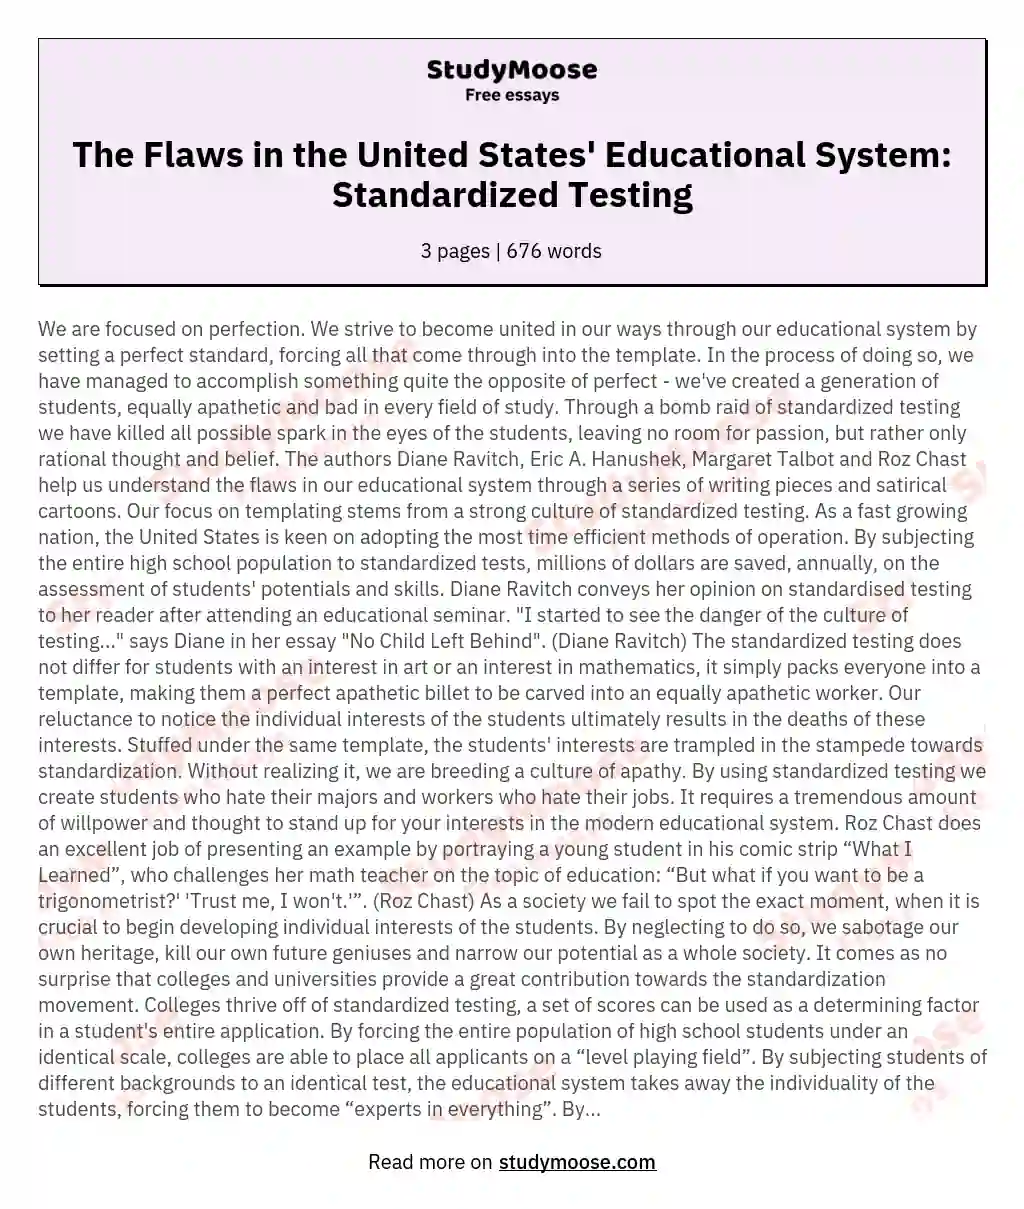 The Flaws in the United States' Educational System: Standardized Testing essay